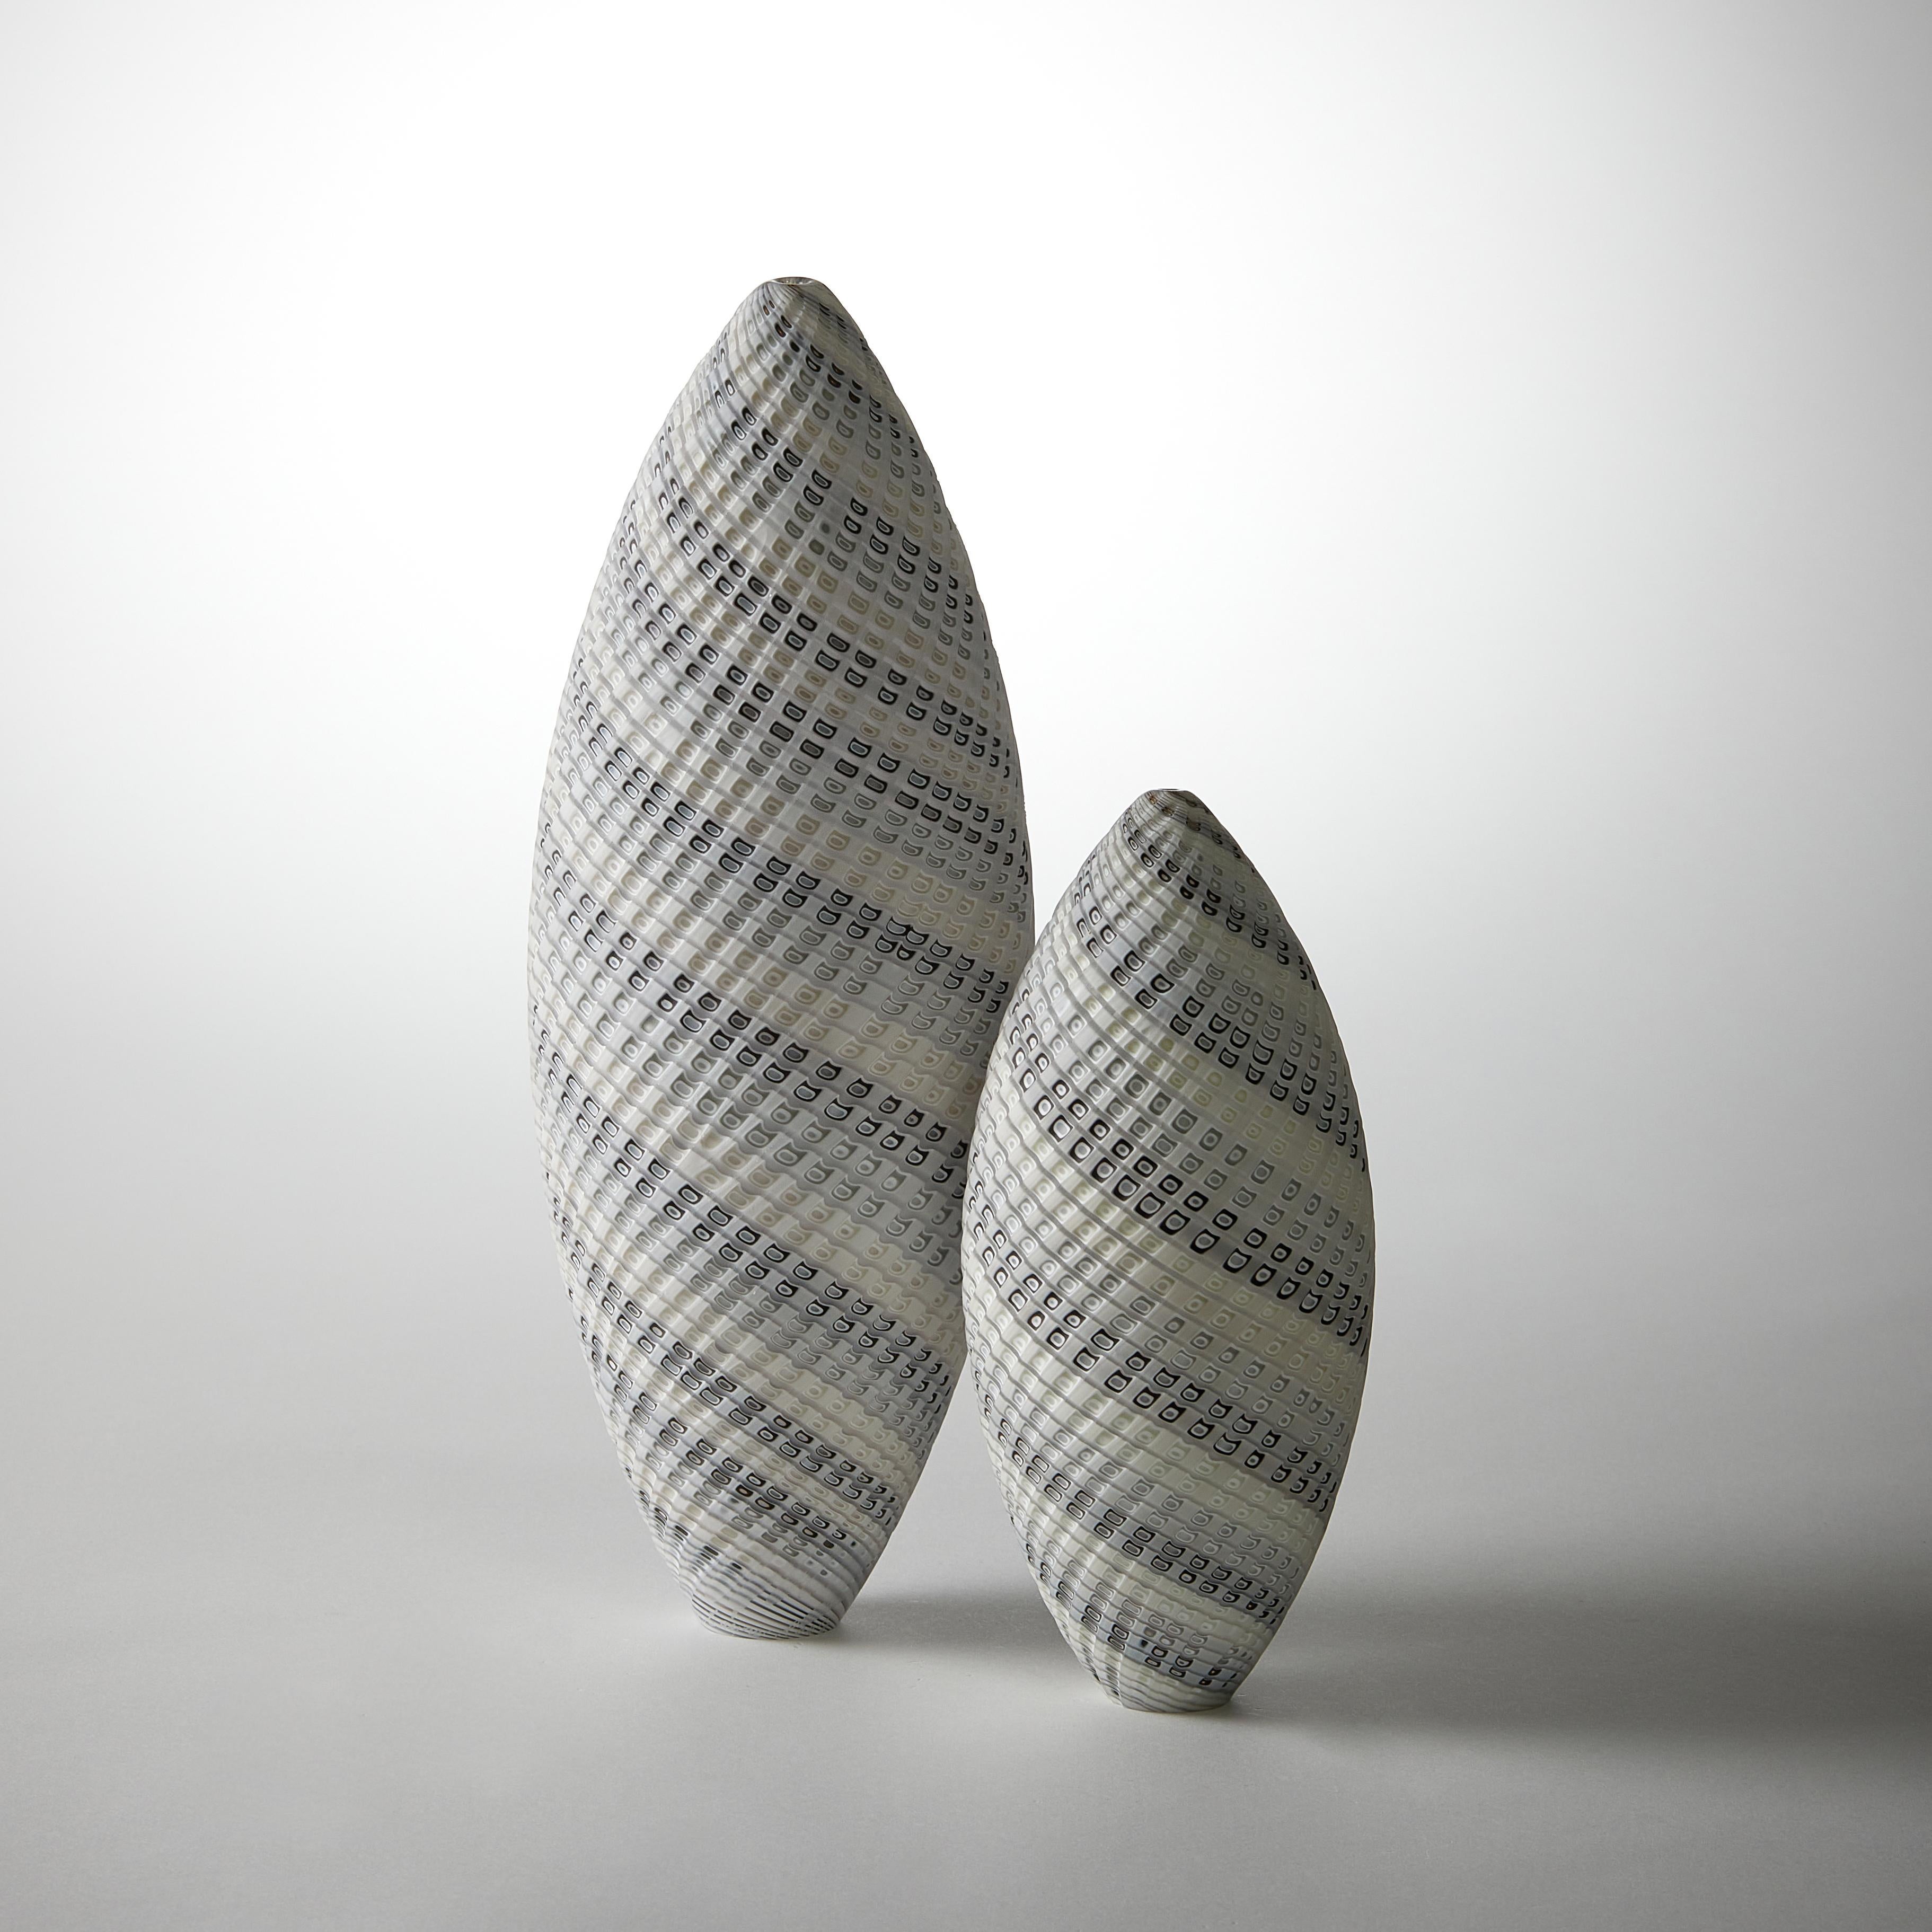 The price shown is for the pair but these can also be bought individually, please see the details below. The dimensions shown are for the largest piece.

Woven two-tone White is a unique pair of exquisite artworks, each has been hand blown and cut